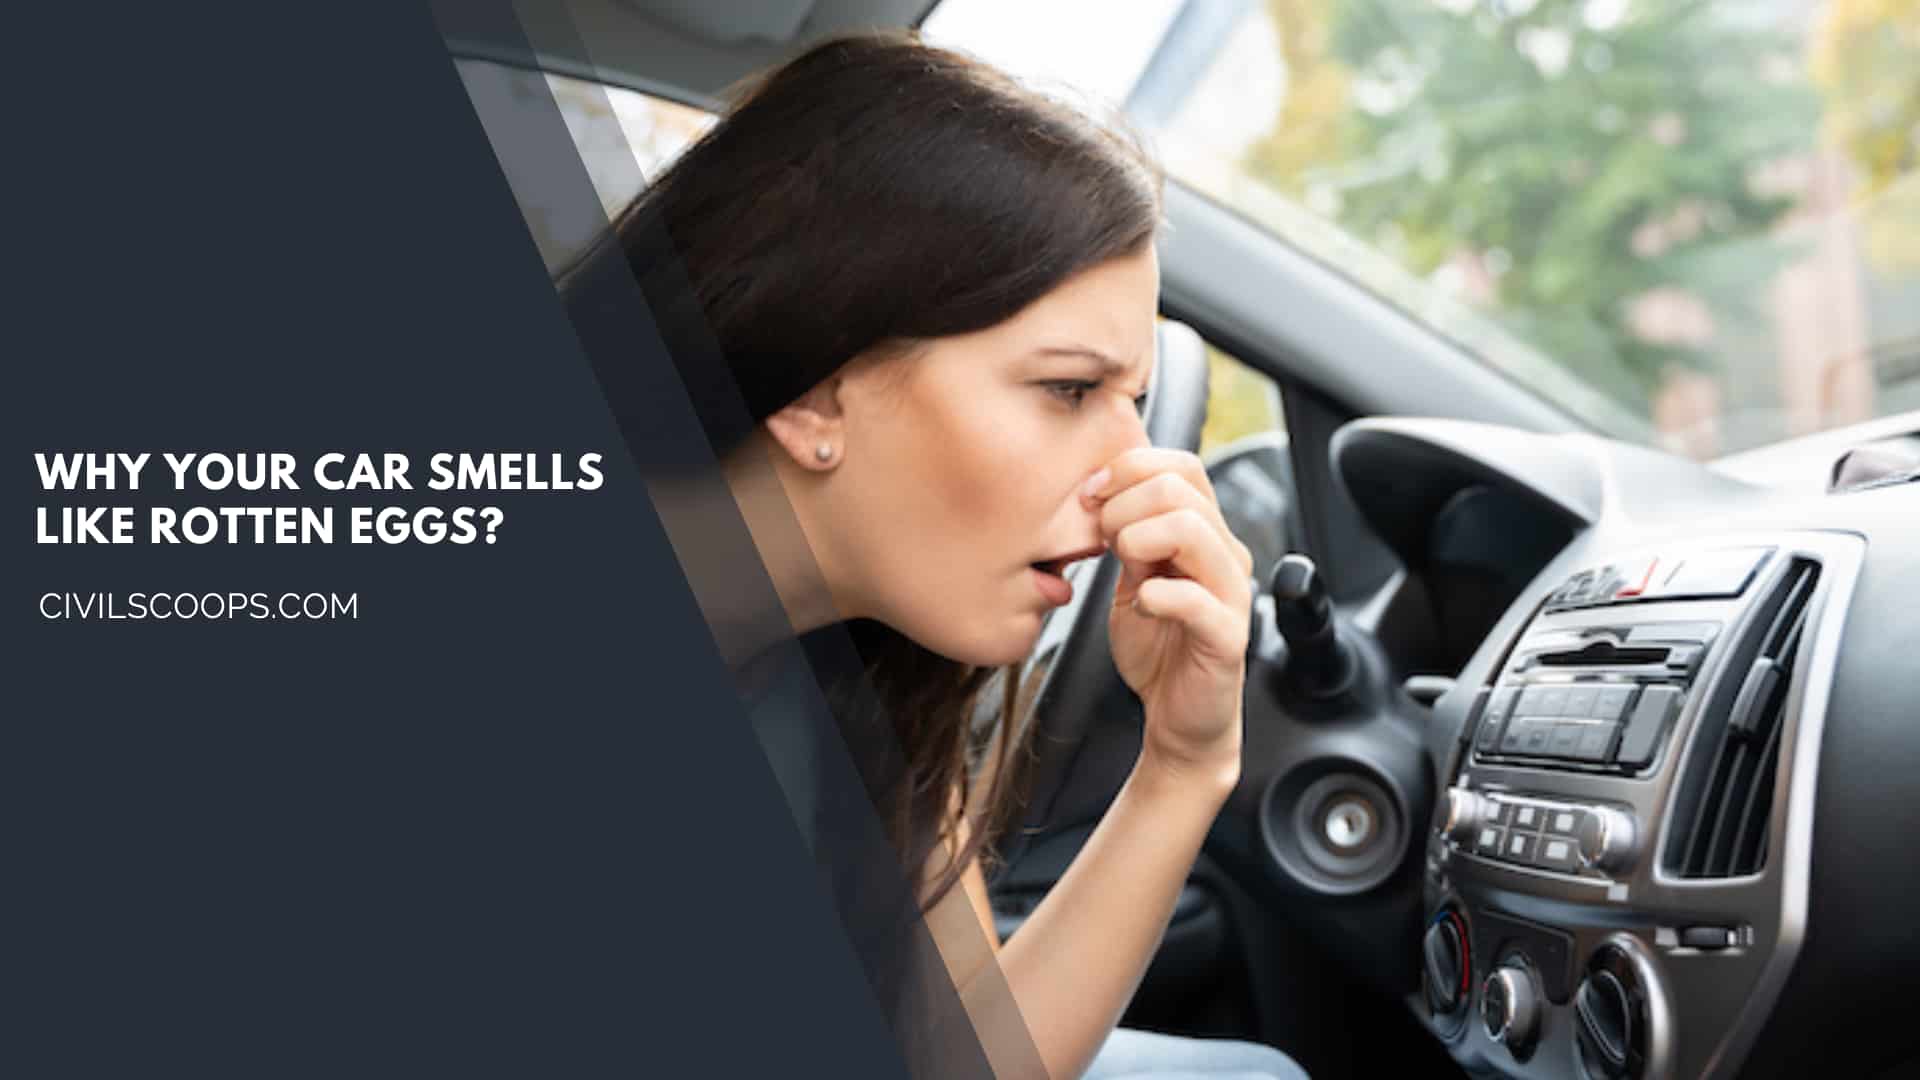 Why Your Car Smells Like Rotten Eggs?